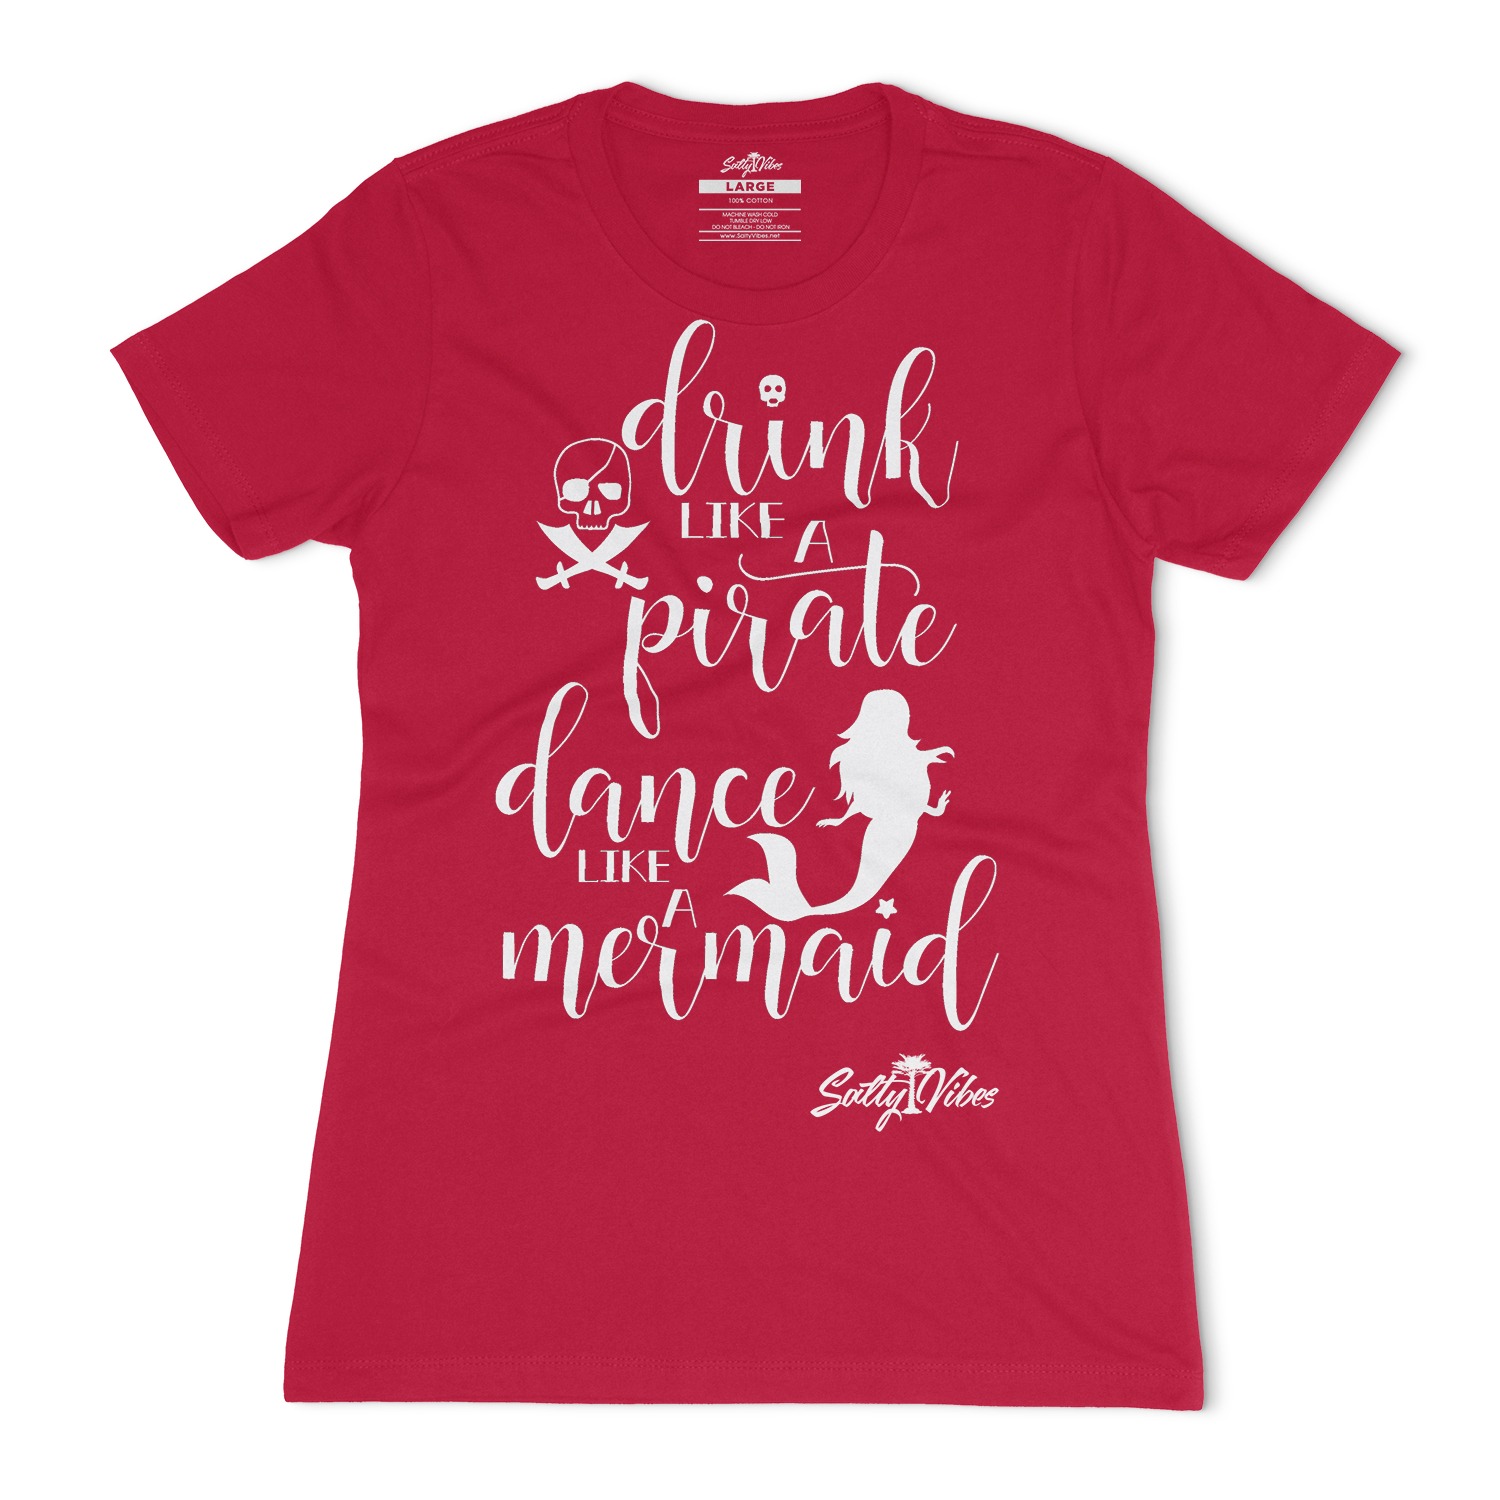 Salty Vibes Mermaid Sailor Women's Fitted T-Shirt - Red, 2XL